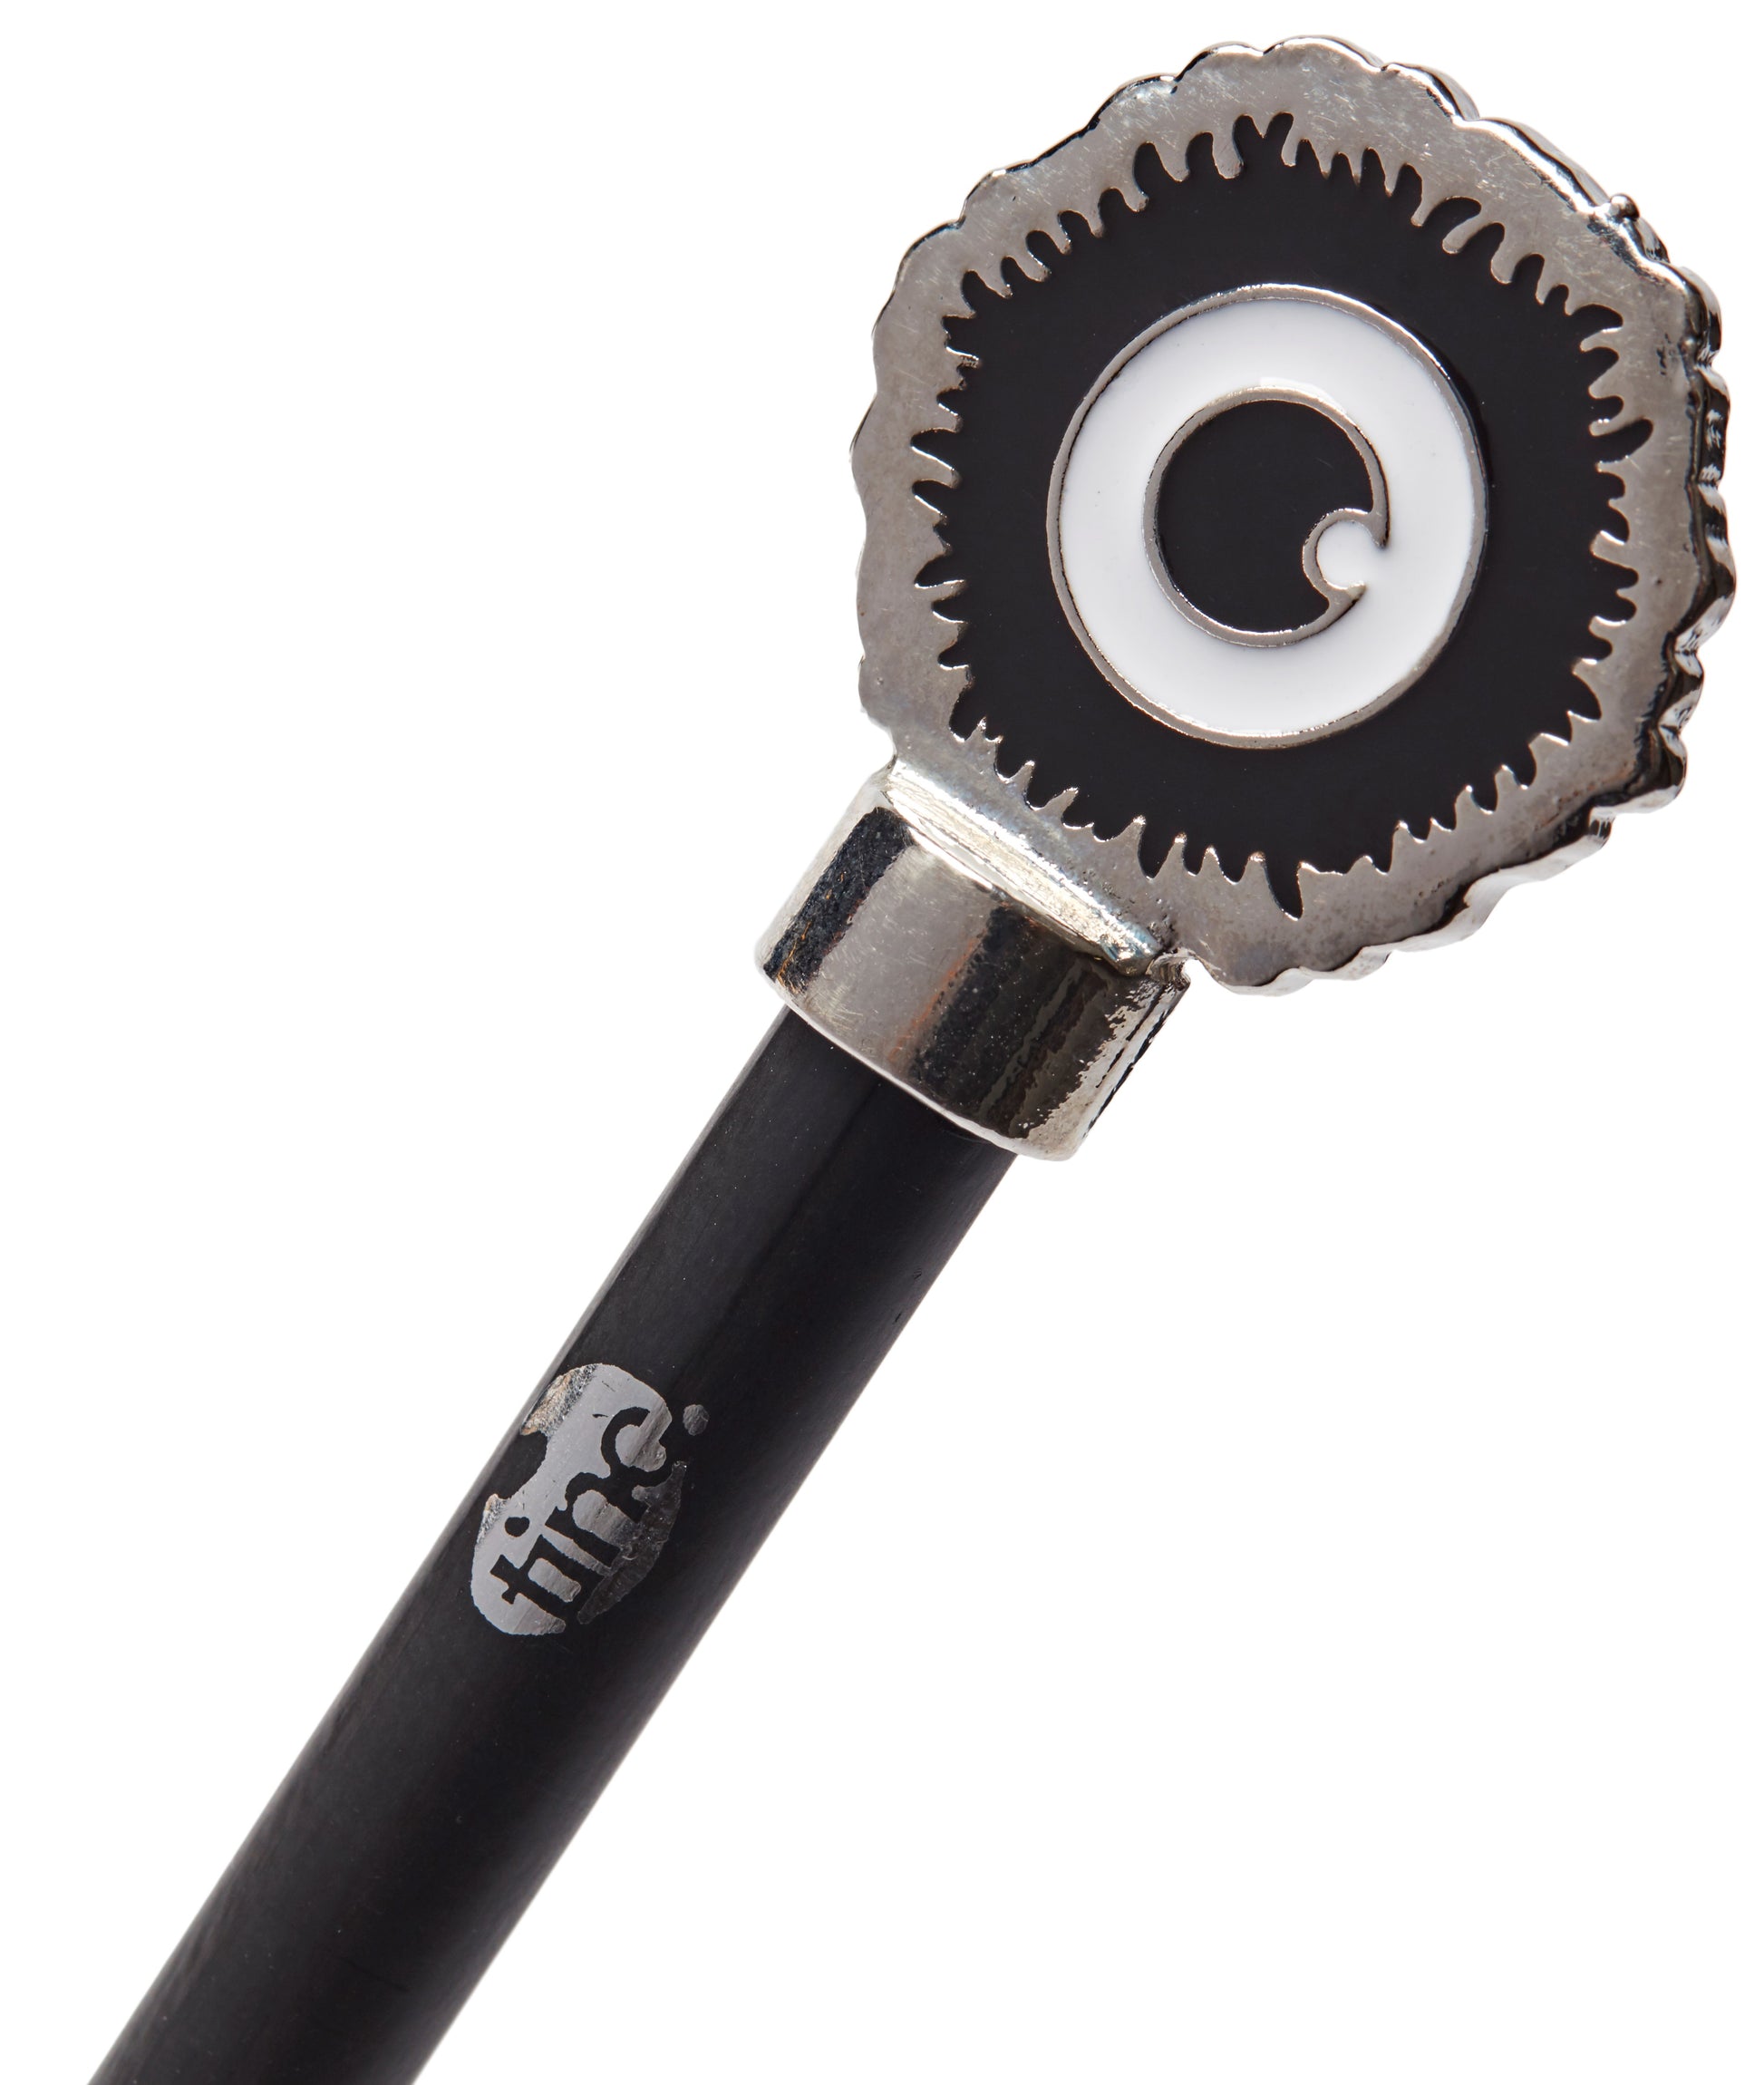 Tinc pencil with eye topper in black and silver